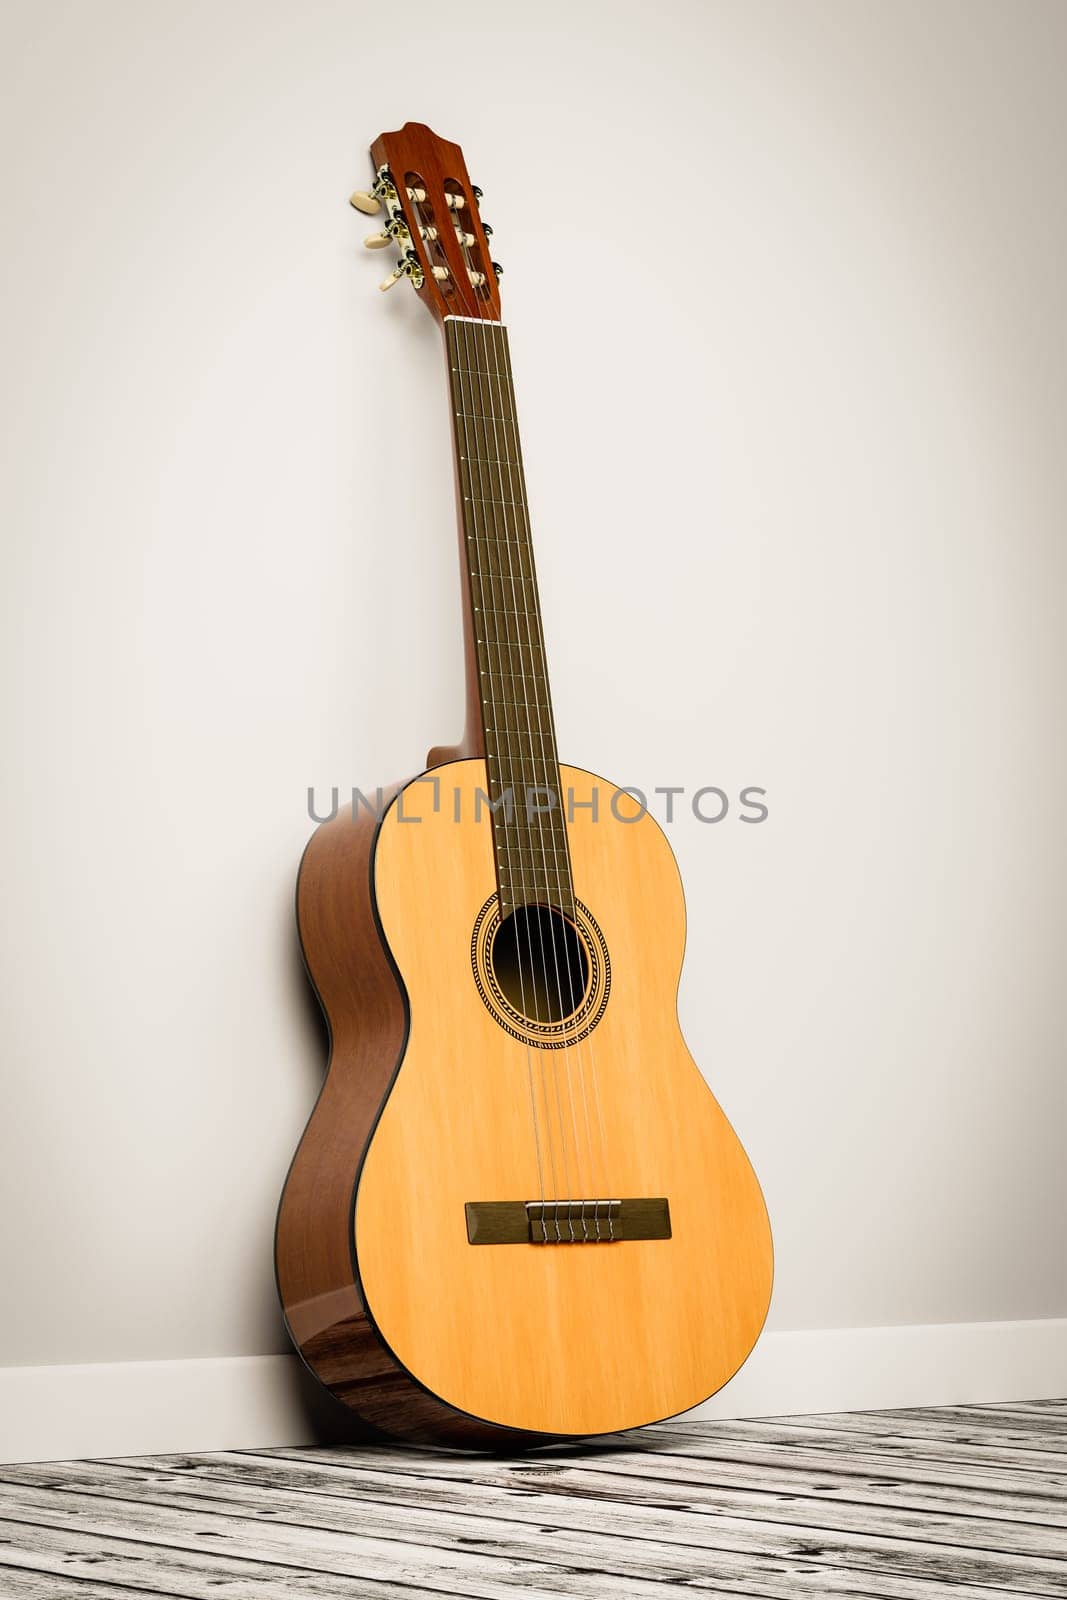 Classical Guitar Leaning Against the Wall of a Room with a Wooden Floor 3D Render Illustration